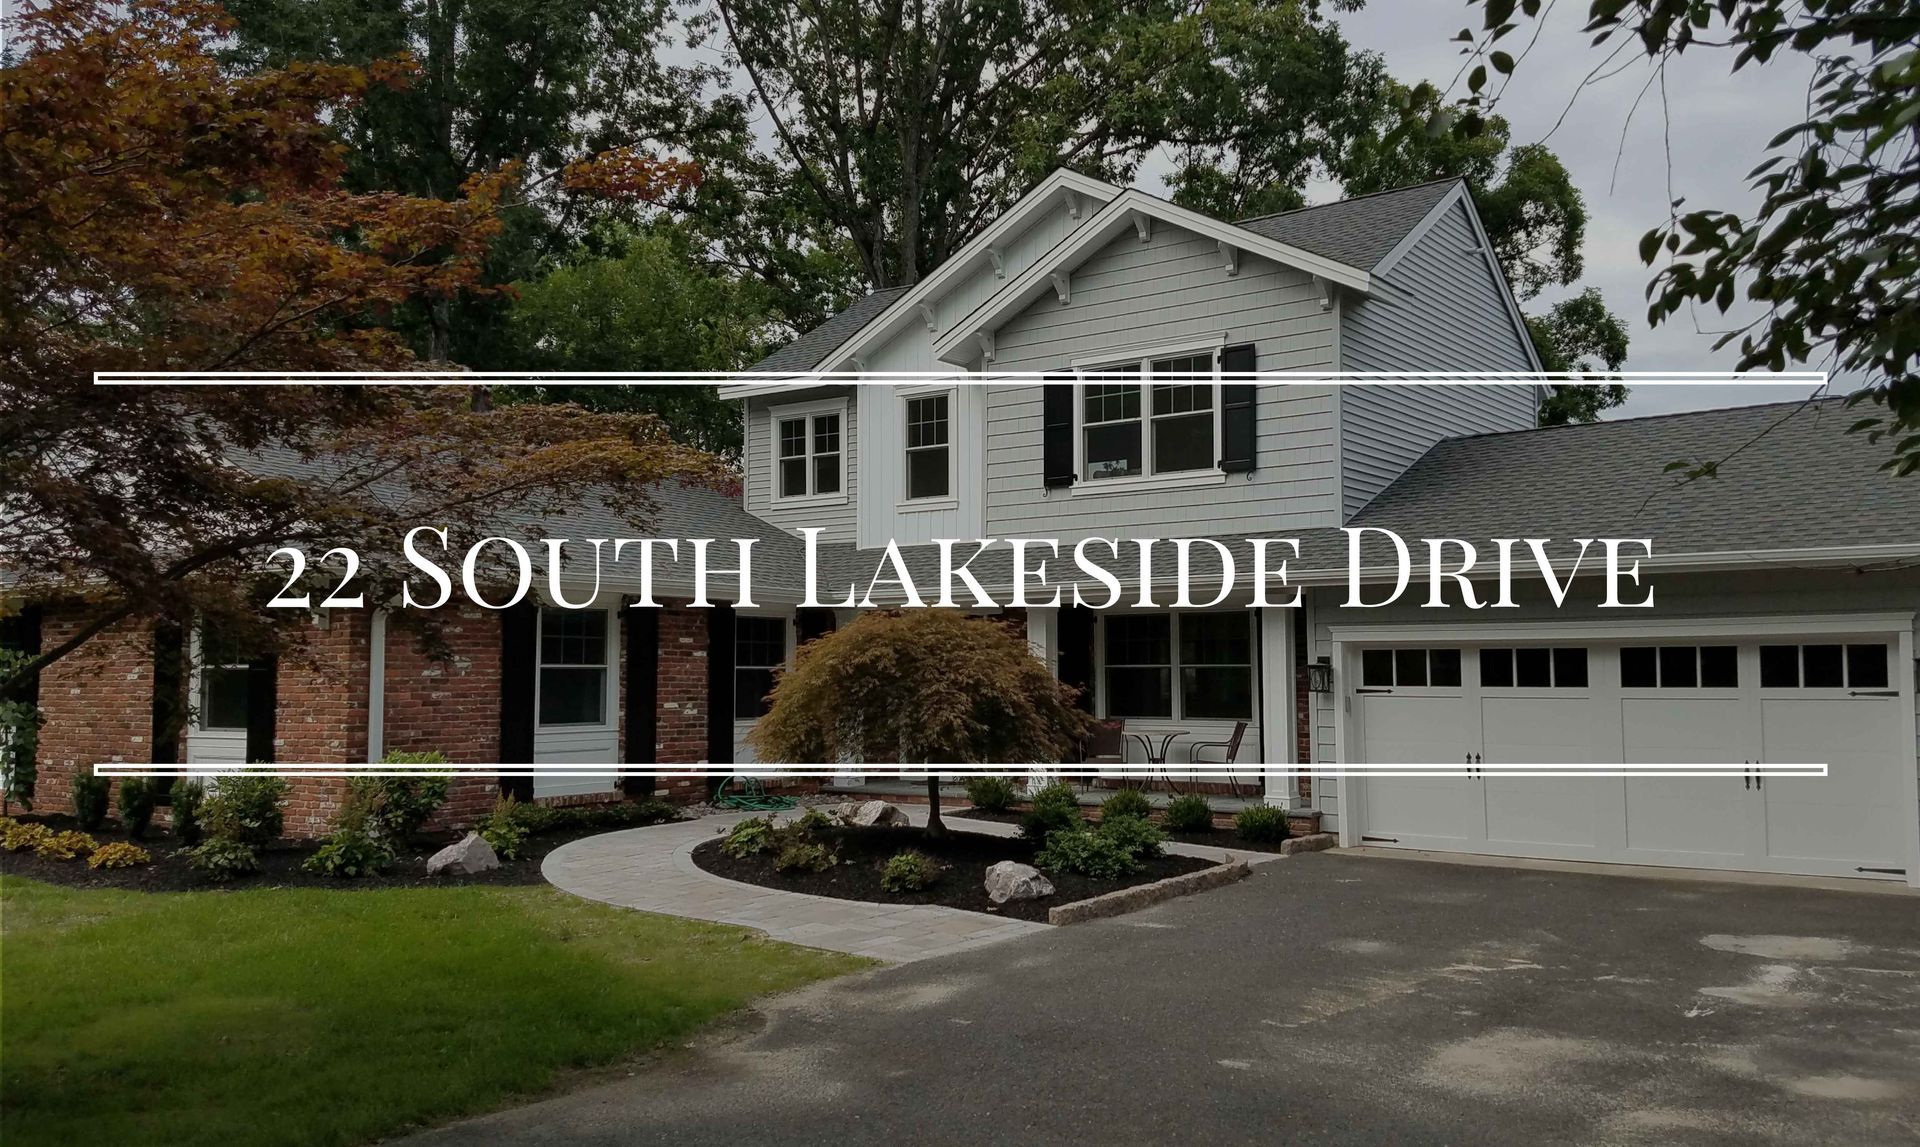 A large brick house with a white garage door is for sale on 22 south lakeside drive.